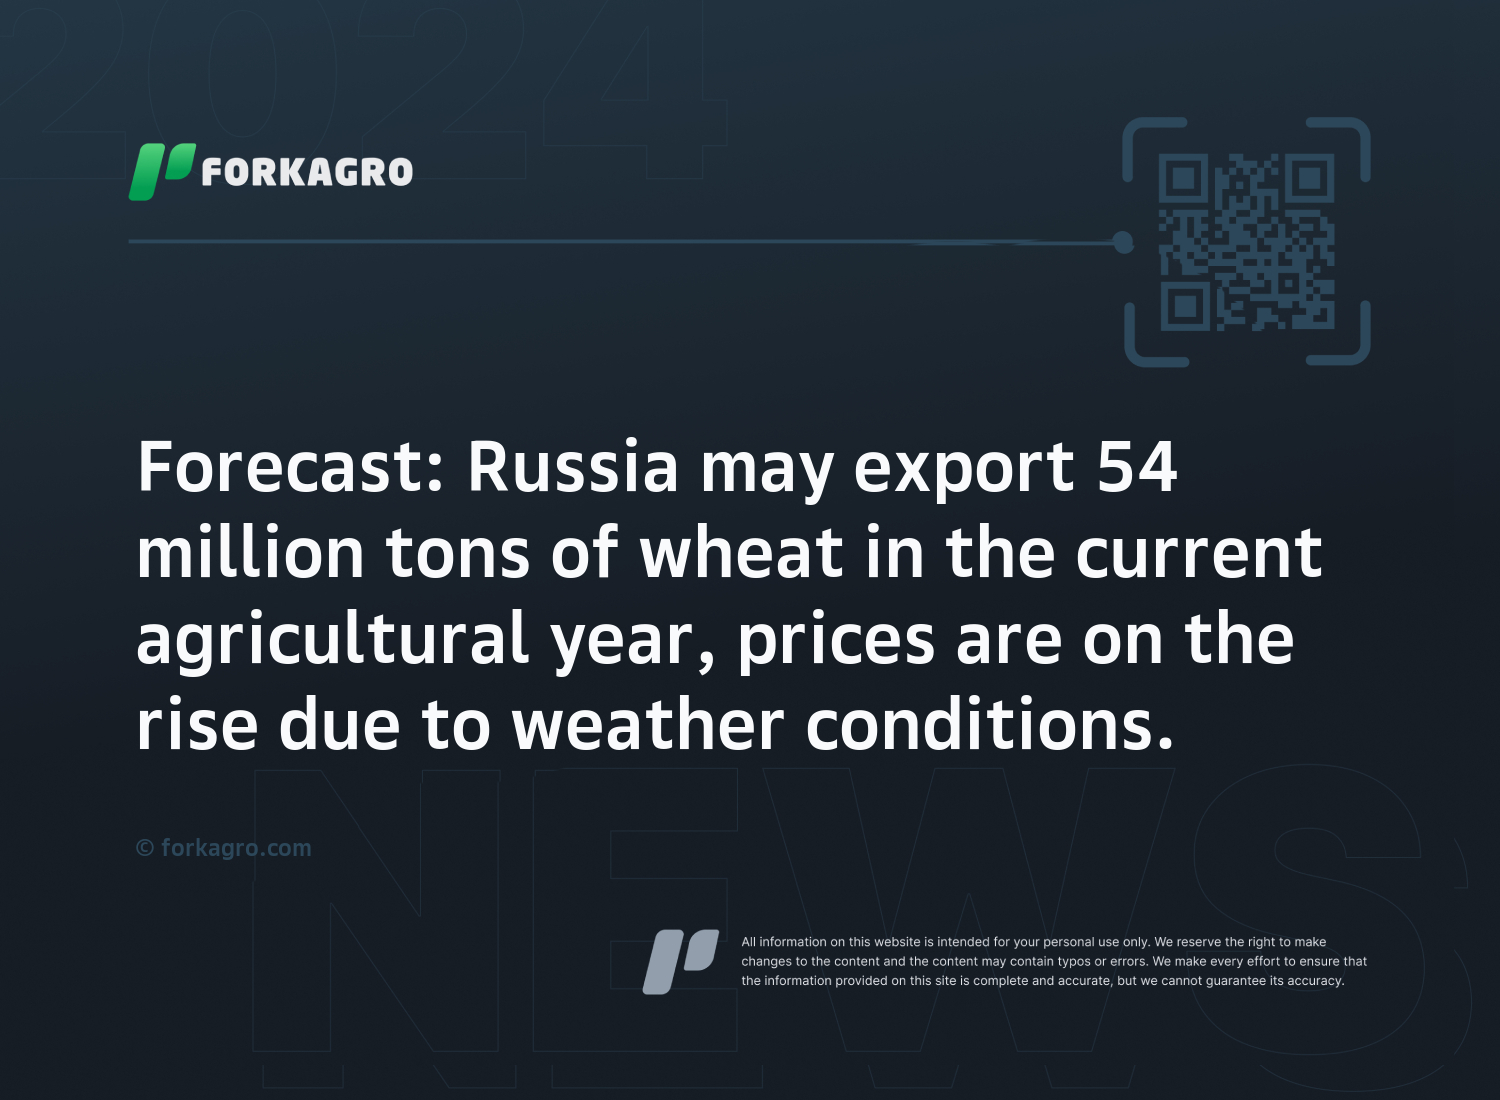 Forecast: Russia may export 54 million tons of wheat in the current agricultural year, prices are on the rise due to weather conditions.